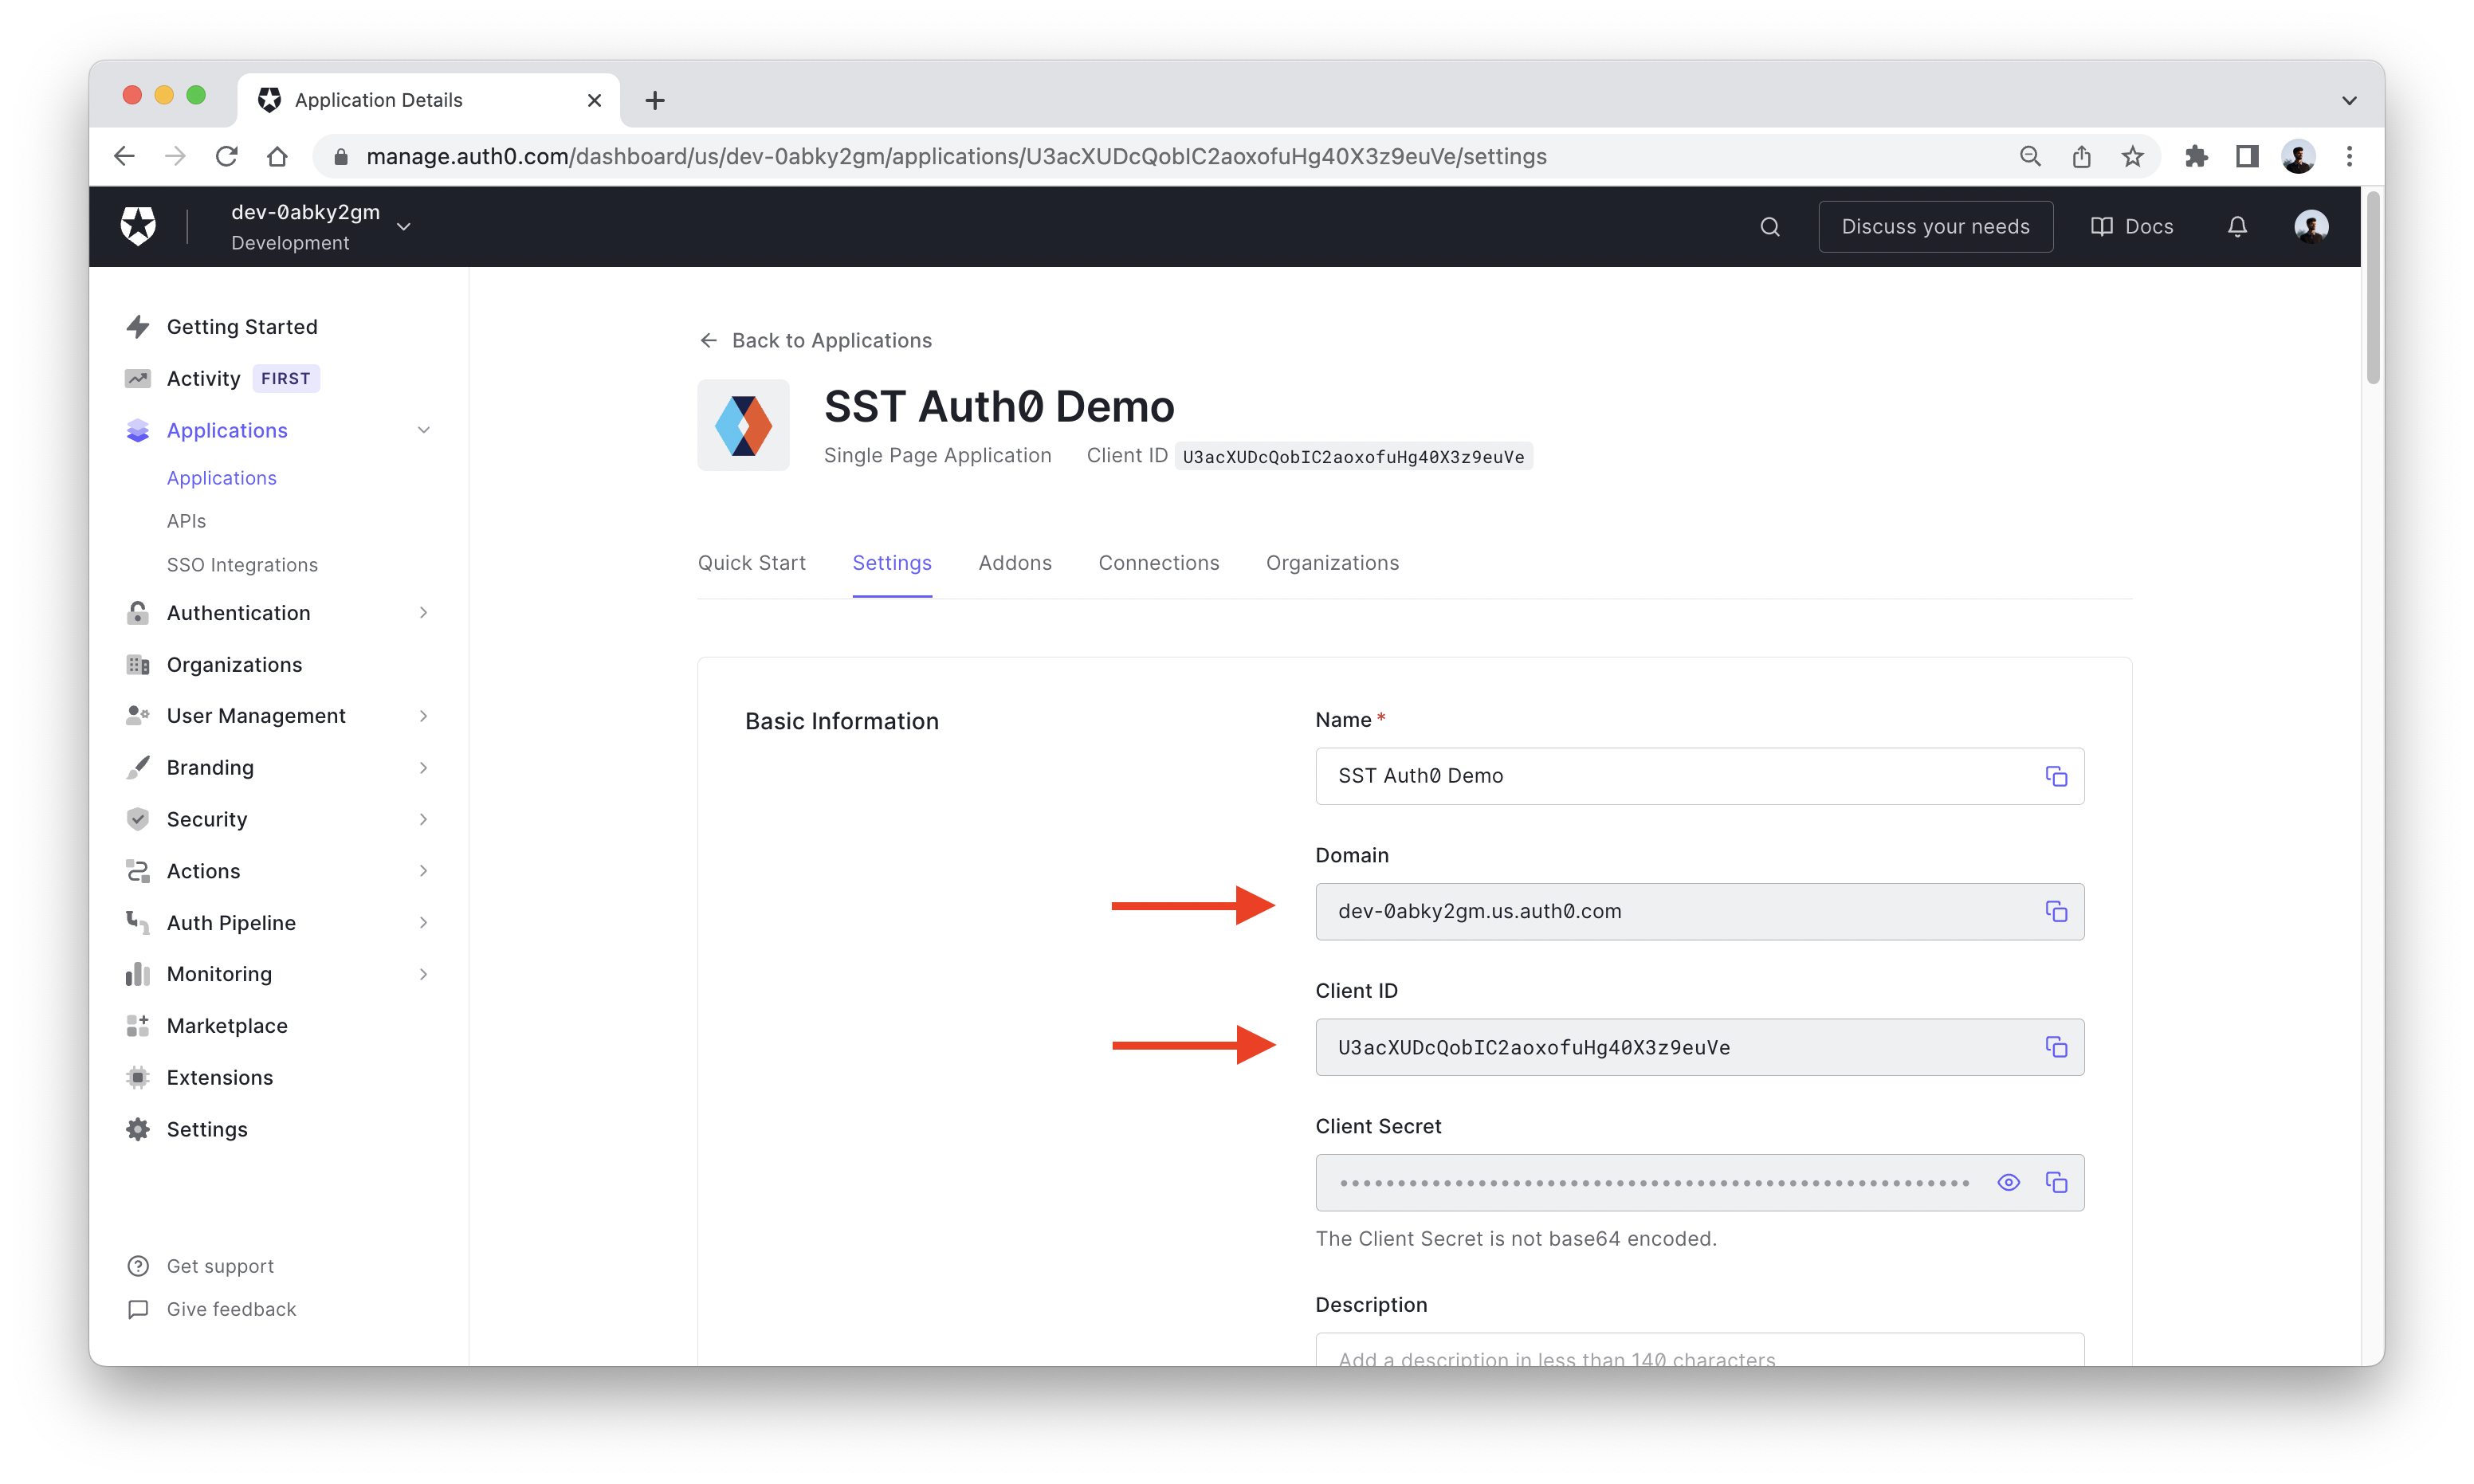 Auth0 applications page